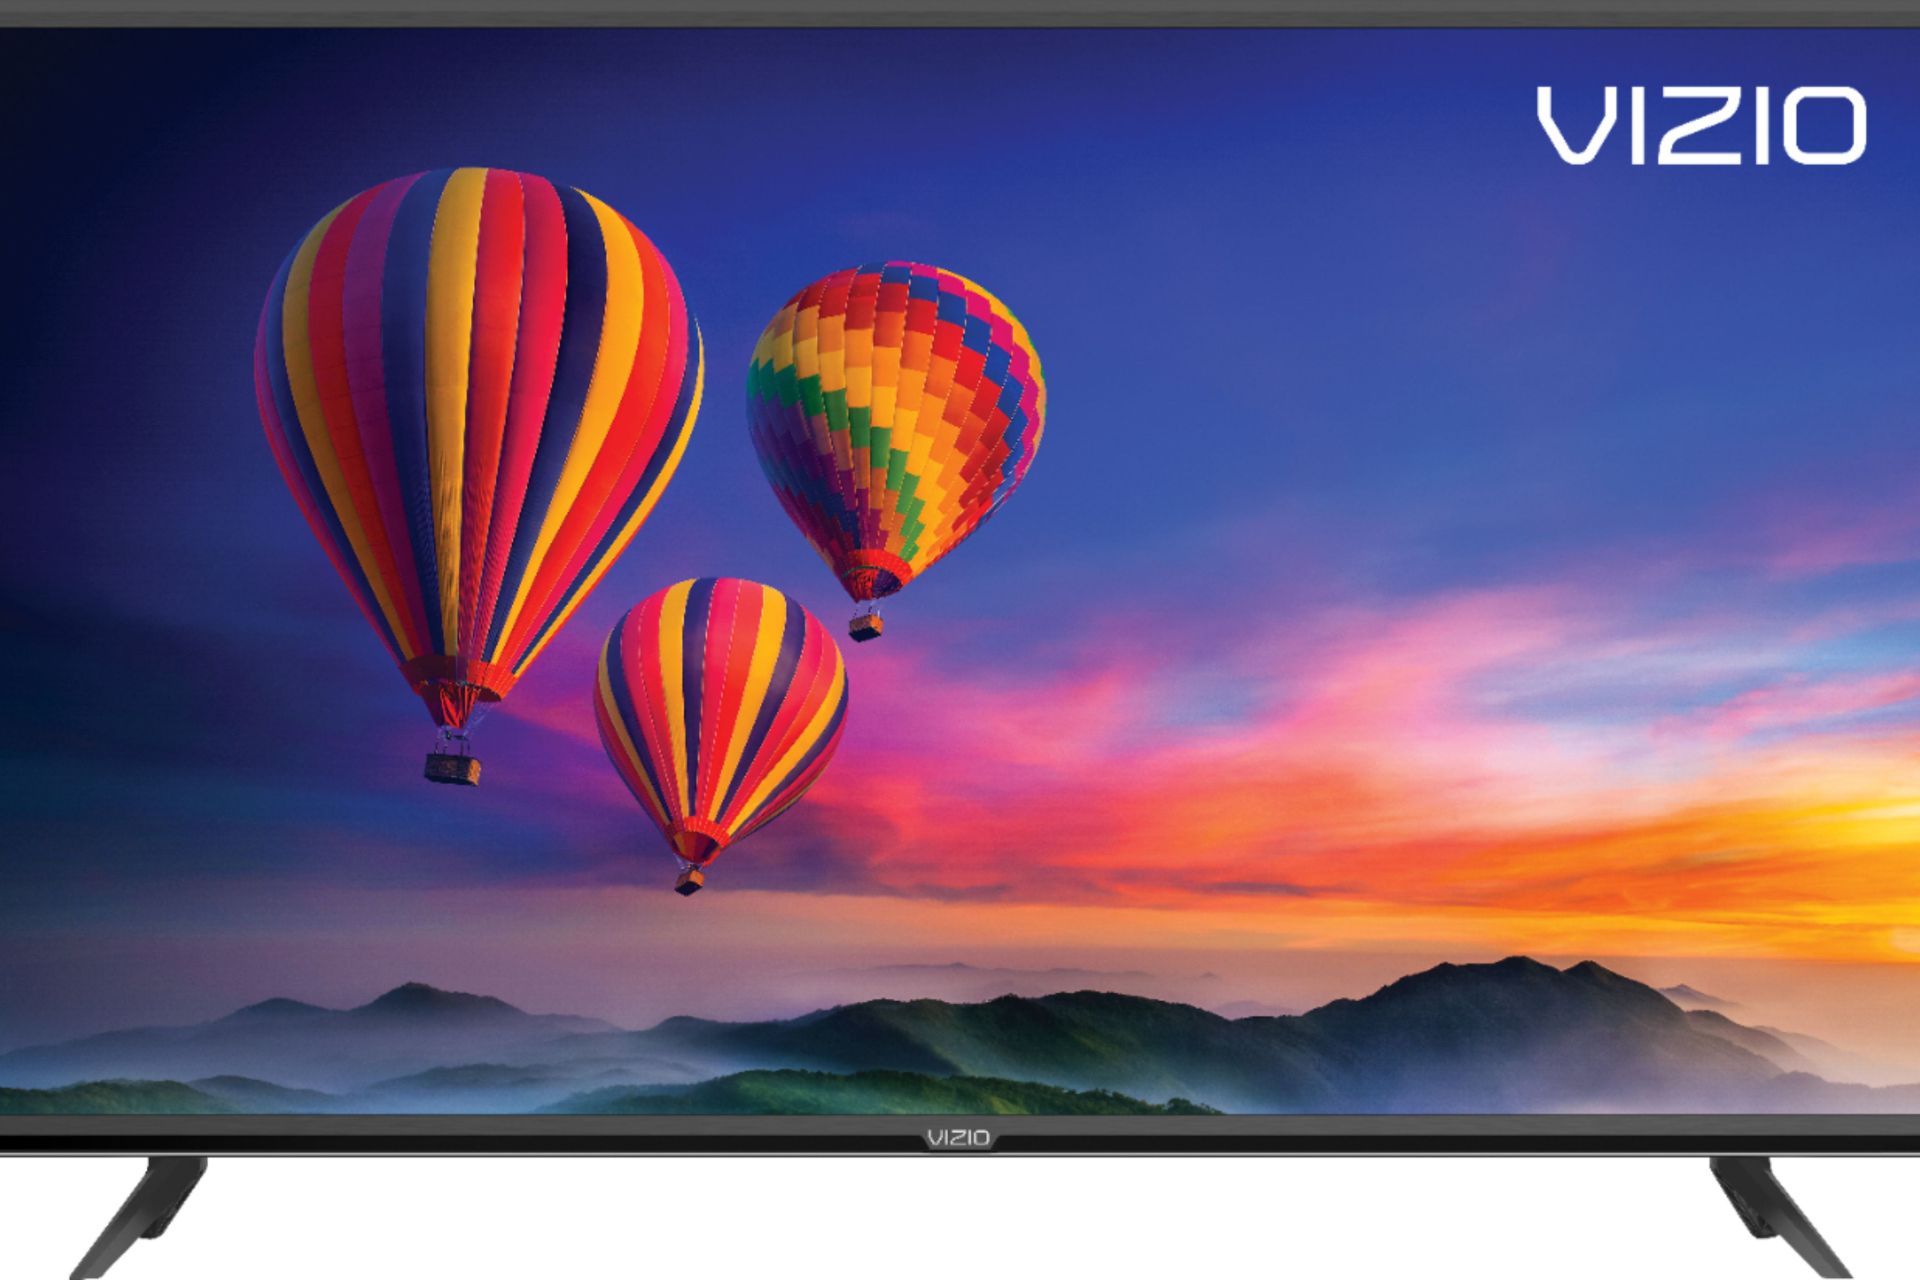 How Much Is A Vizio Smart TV